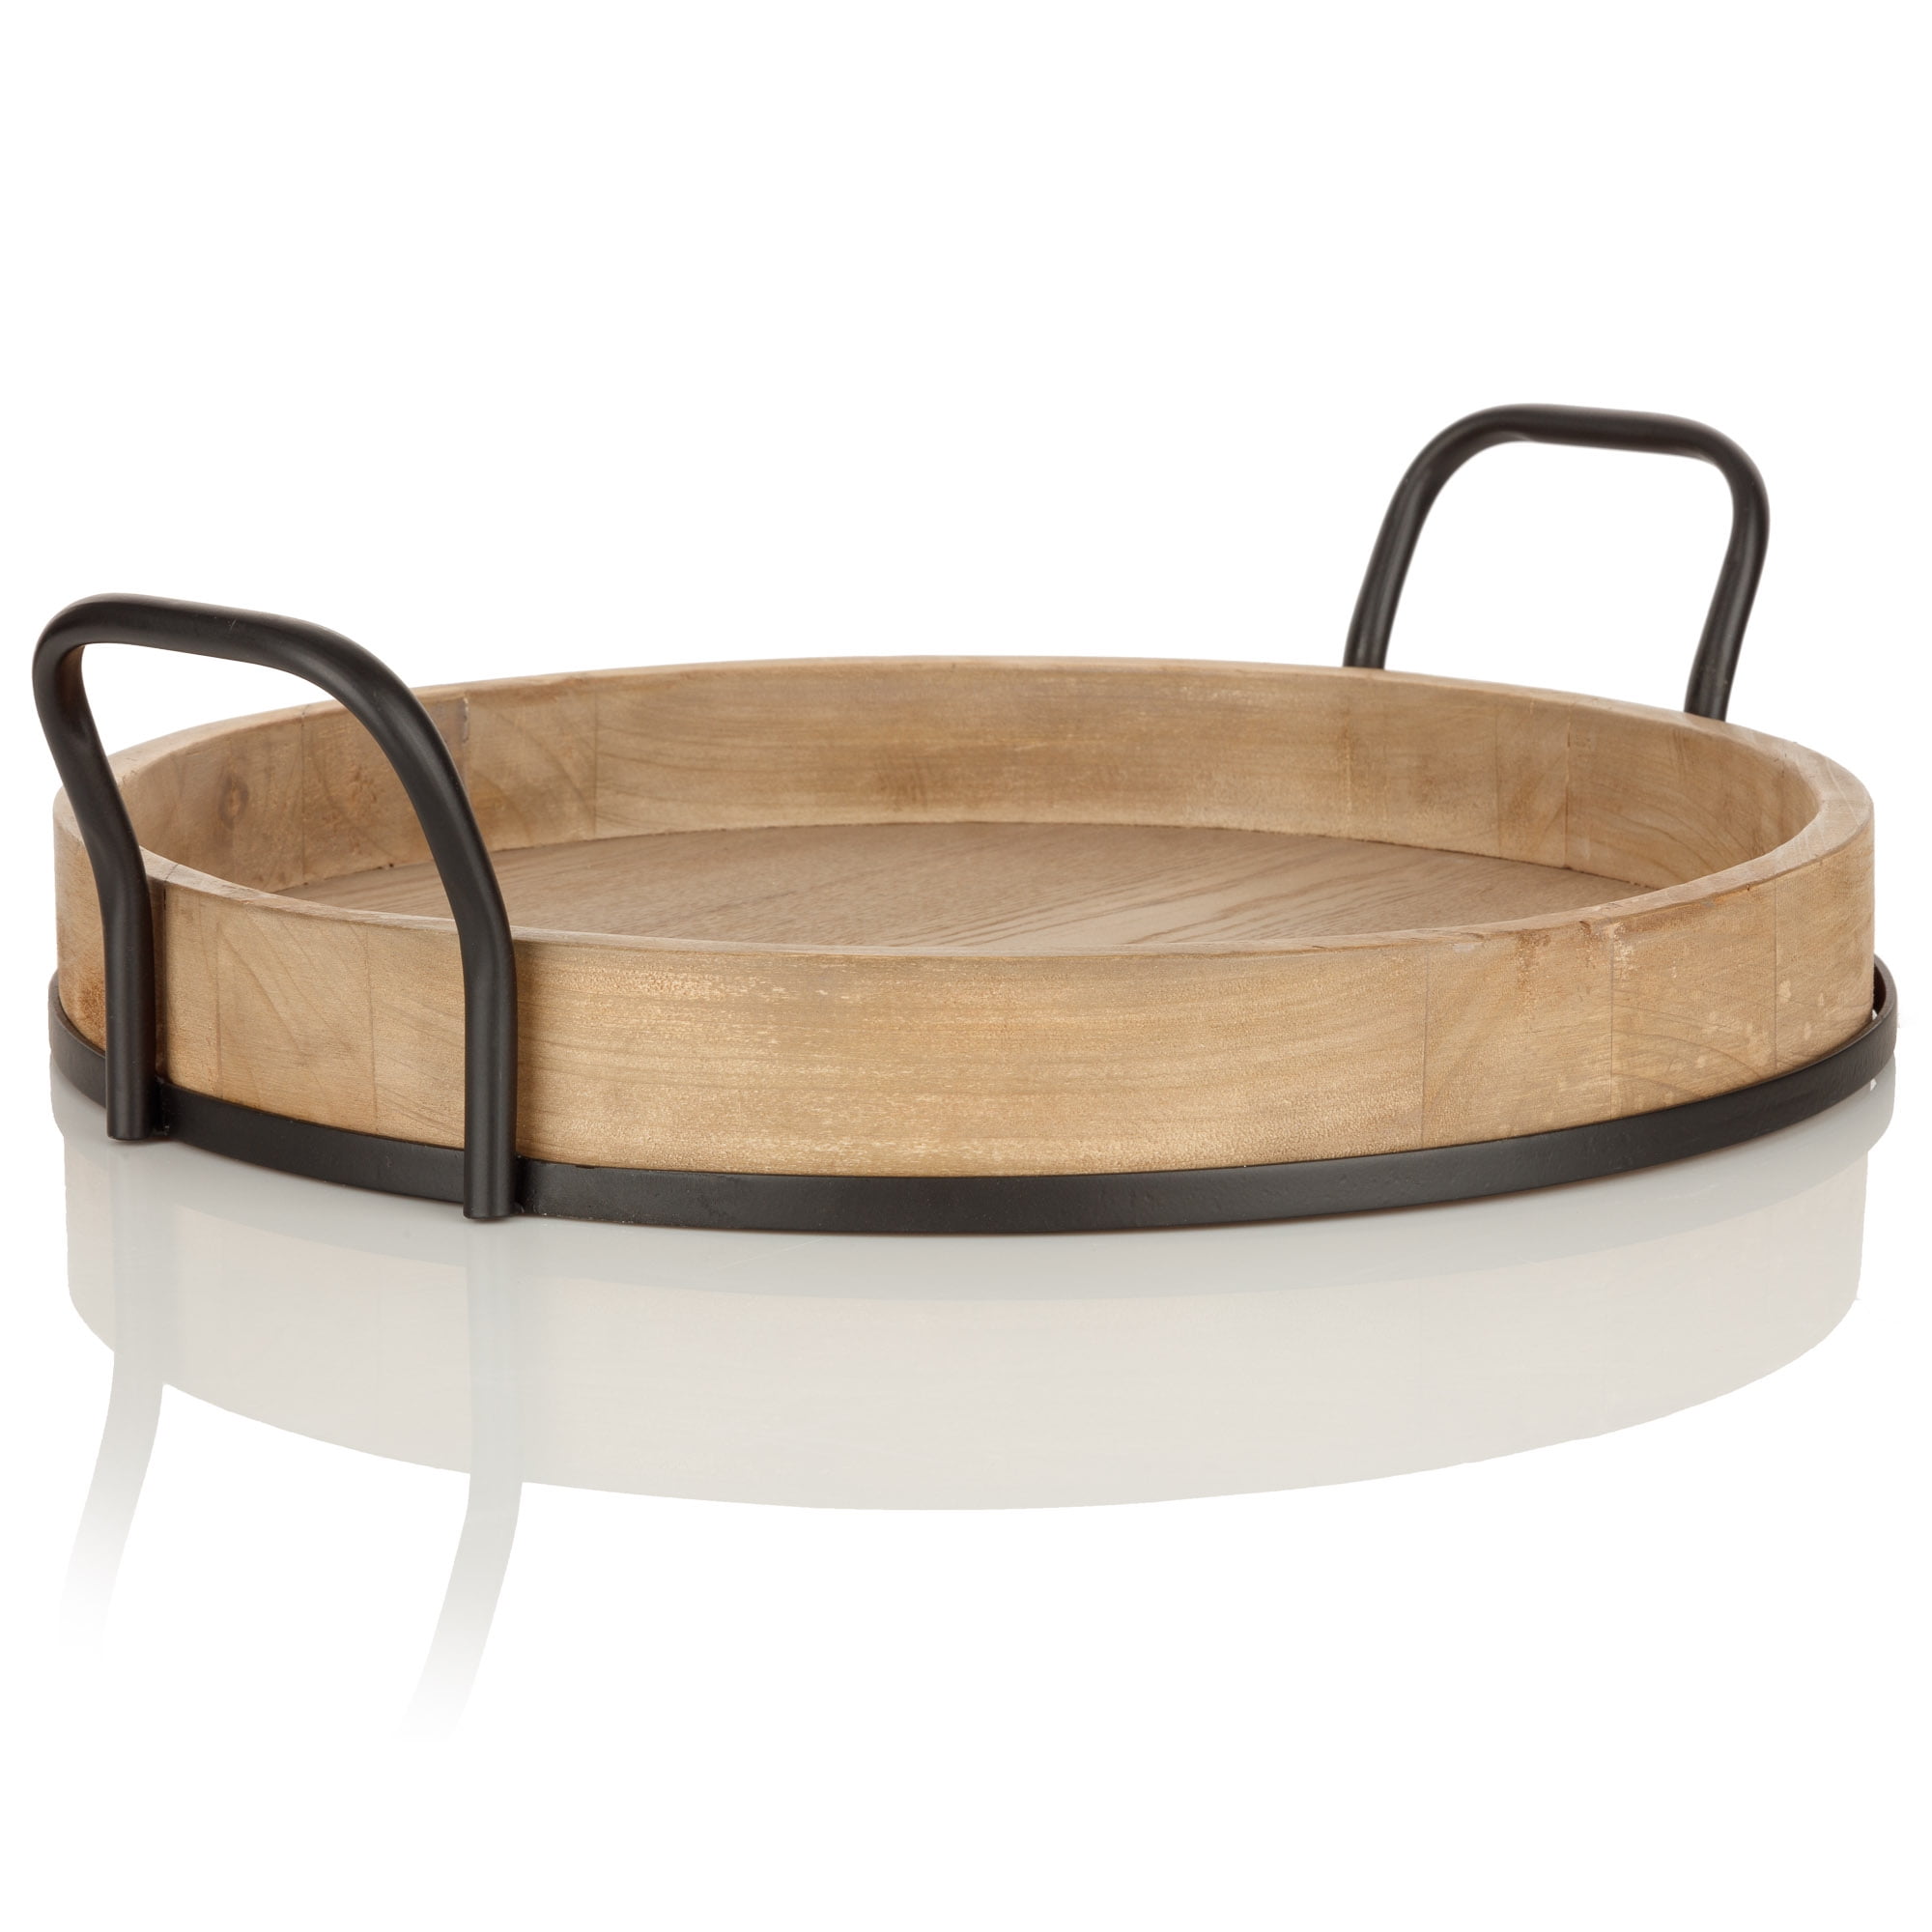 Better Homes & Gardens Round Wood Serving Tray with Black Handles, 18.5 x  17